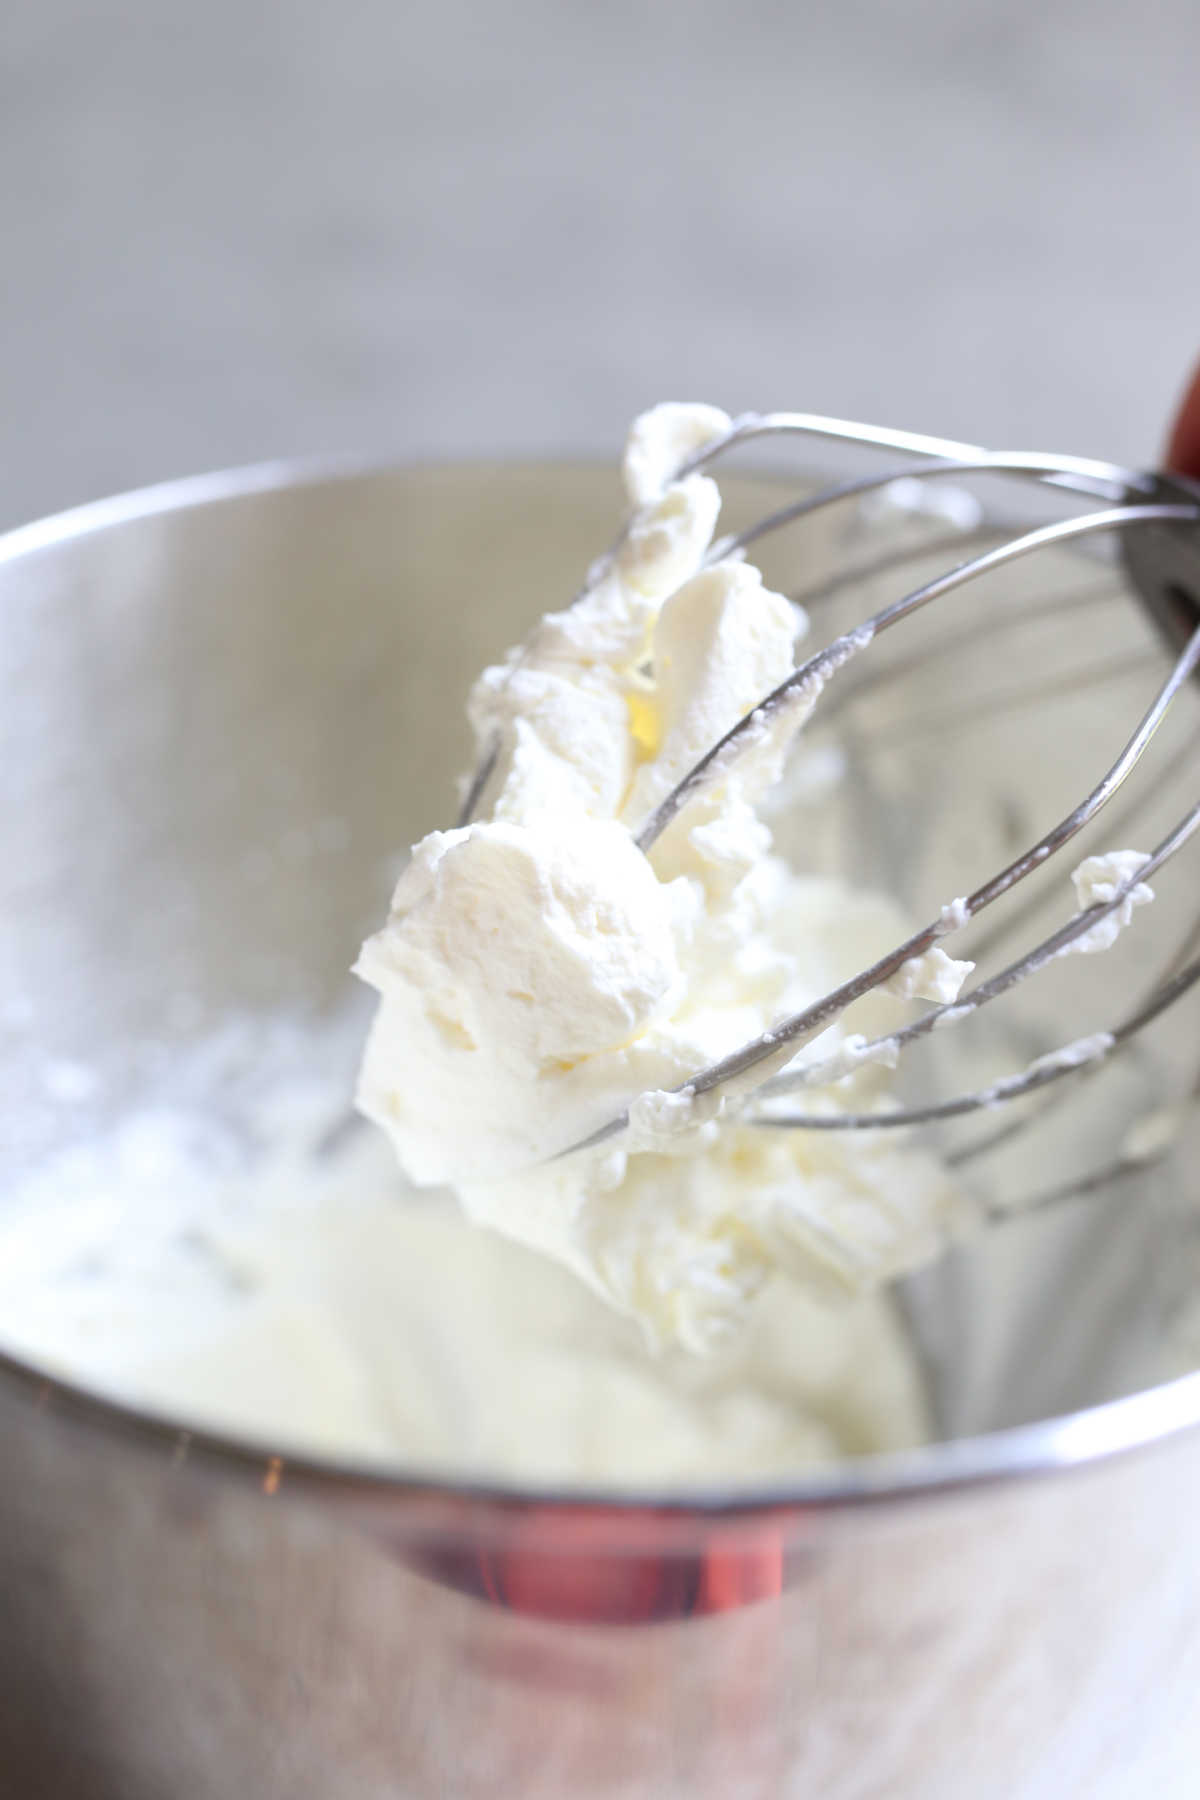 Keto Sugar-Free Whipped Cream on an Electric Mixer Whisk